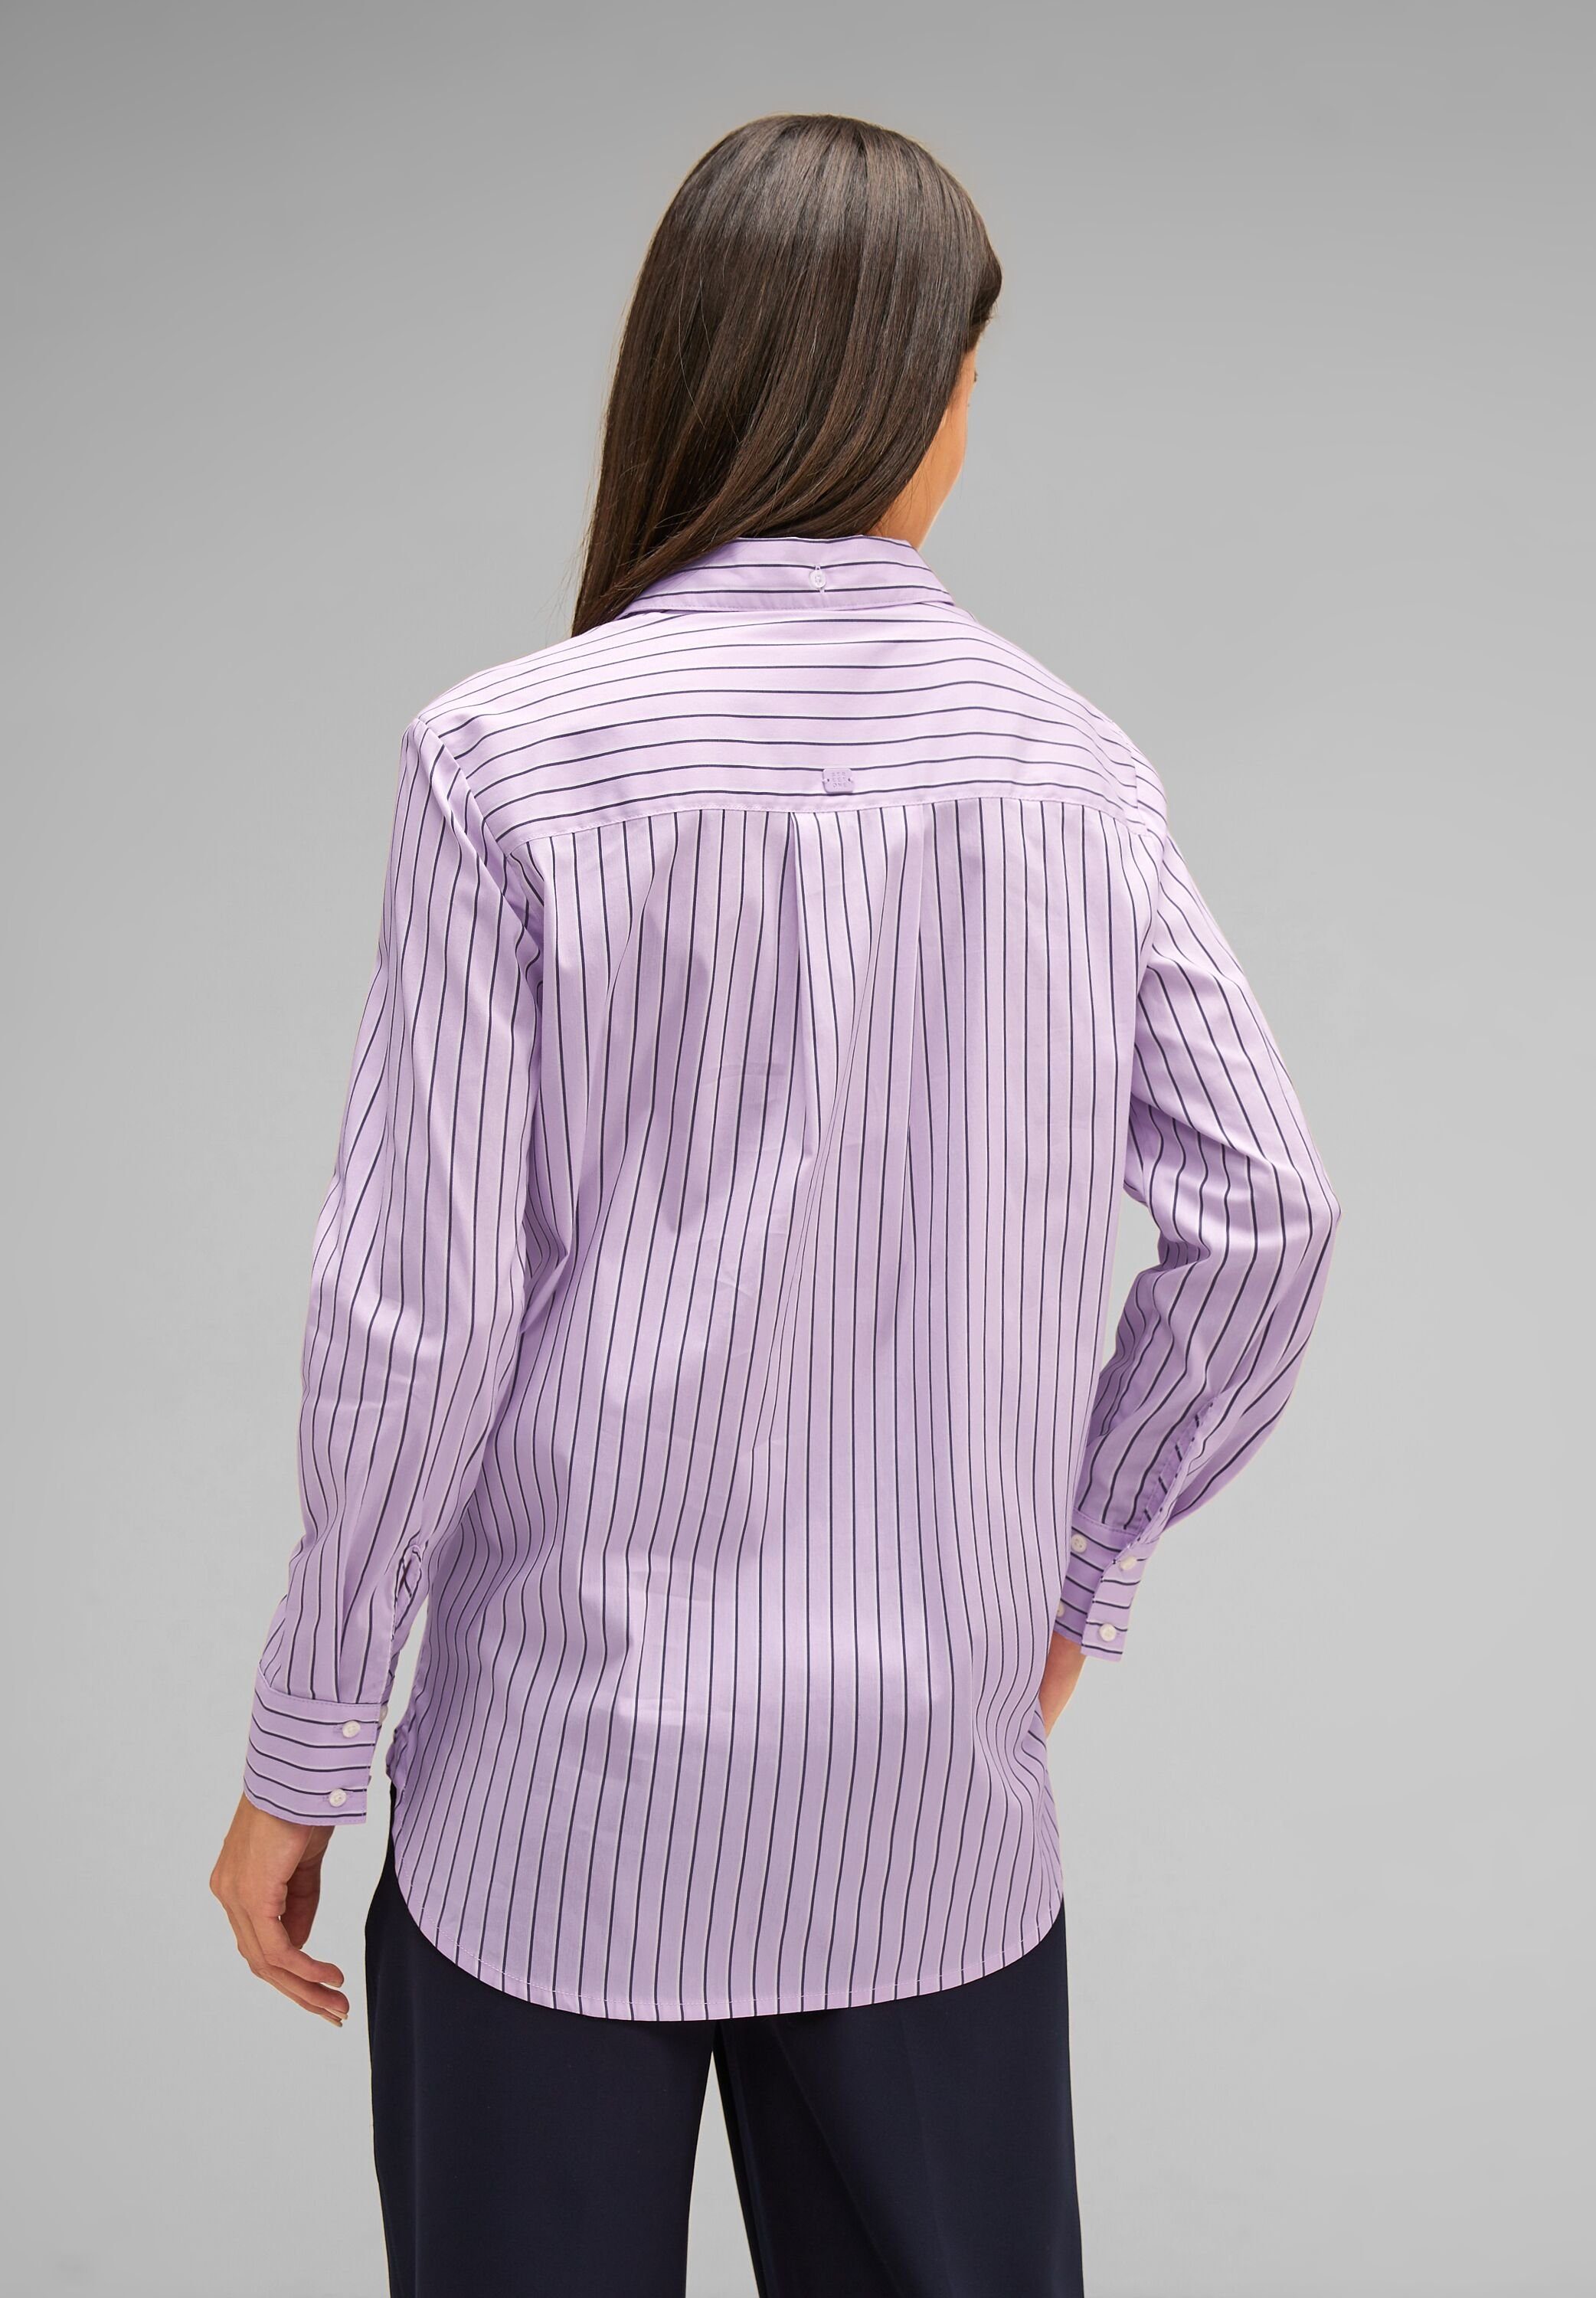 Office ONE lilac soft office Longbluse LTD Striped blouse Streifenmuster QR Streifenbluse STREET pure